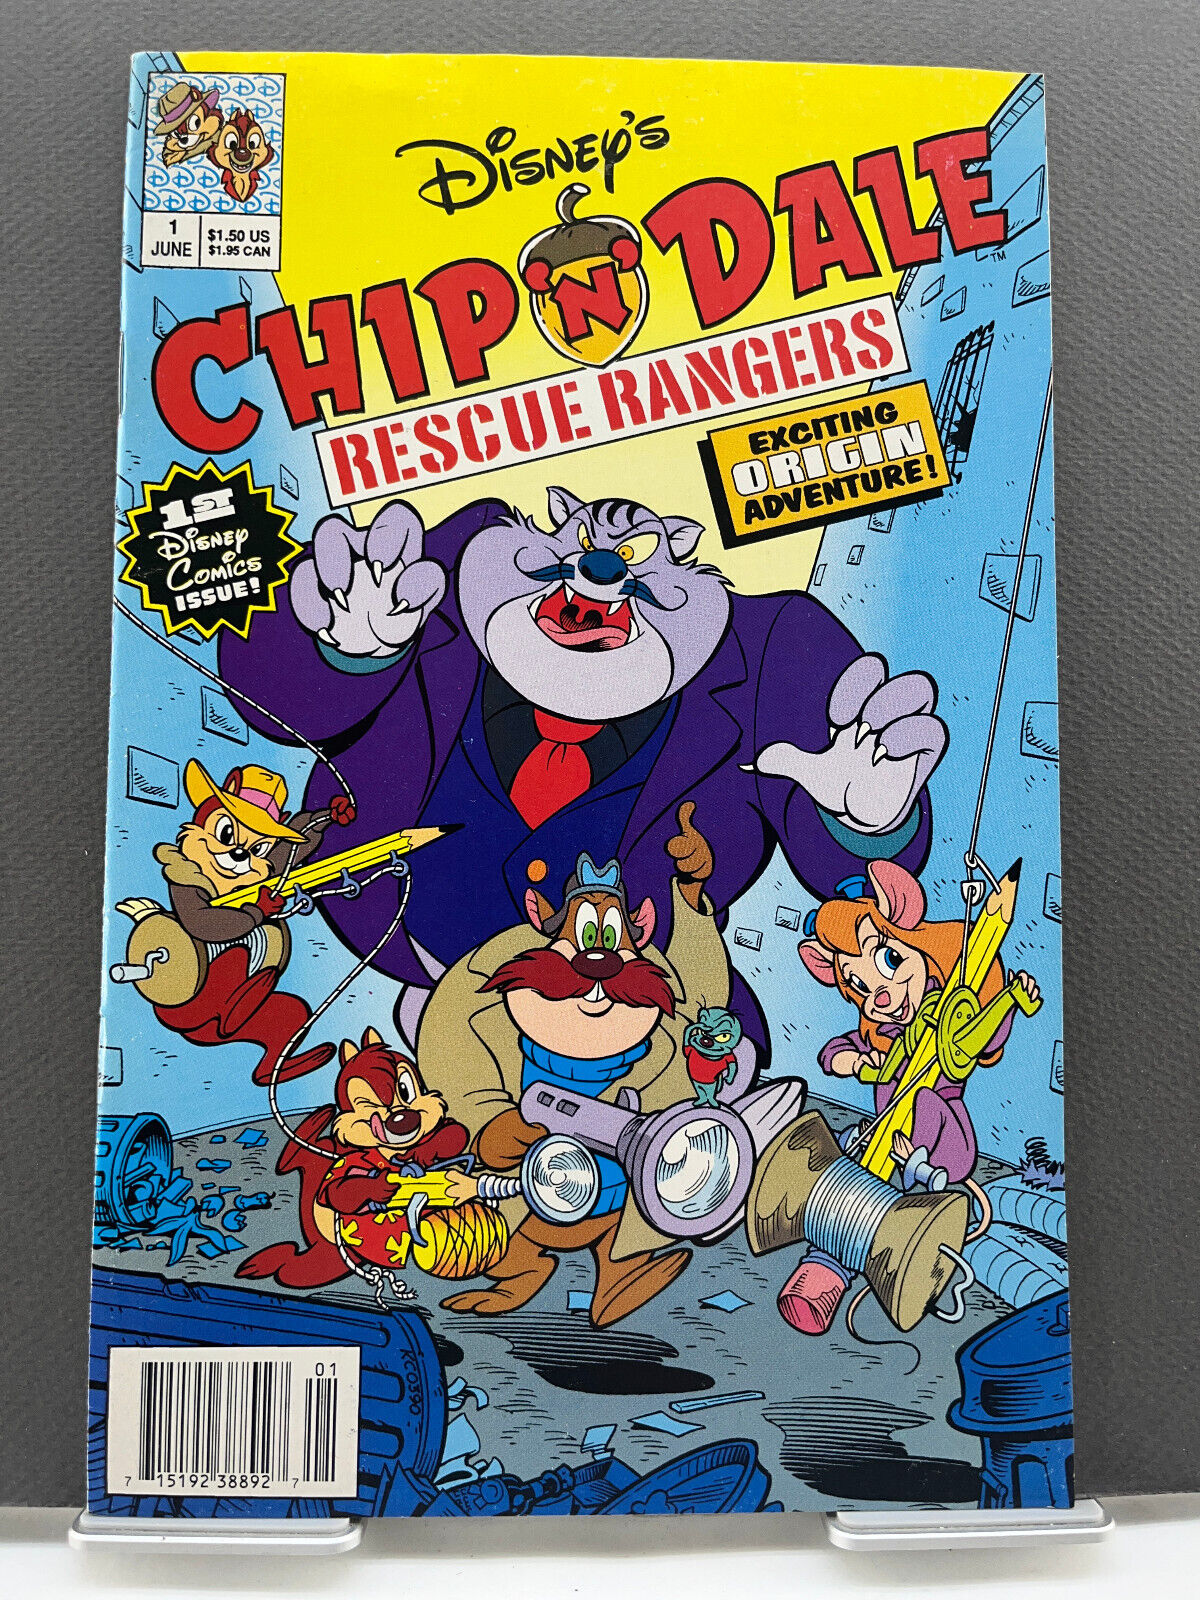 Chip \'n\' Dale Rescue Rangers #1 Disney 1990 8.0 Very fine Newstand